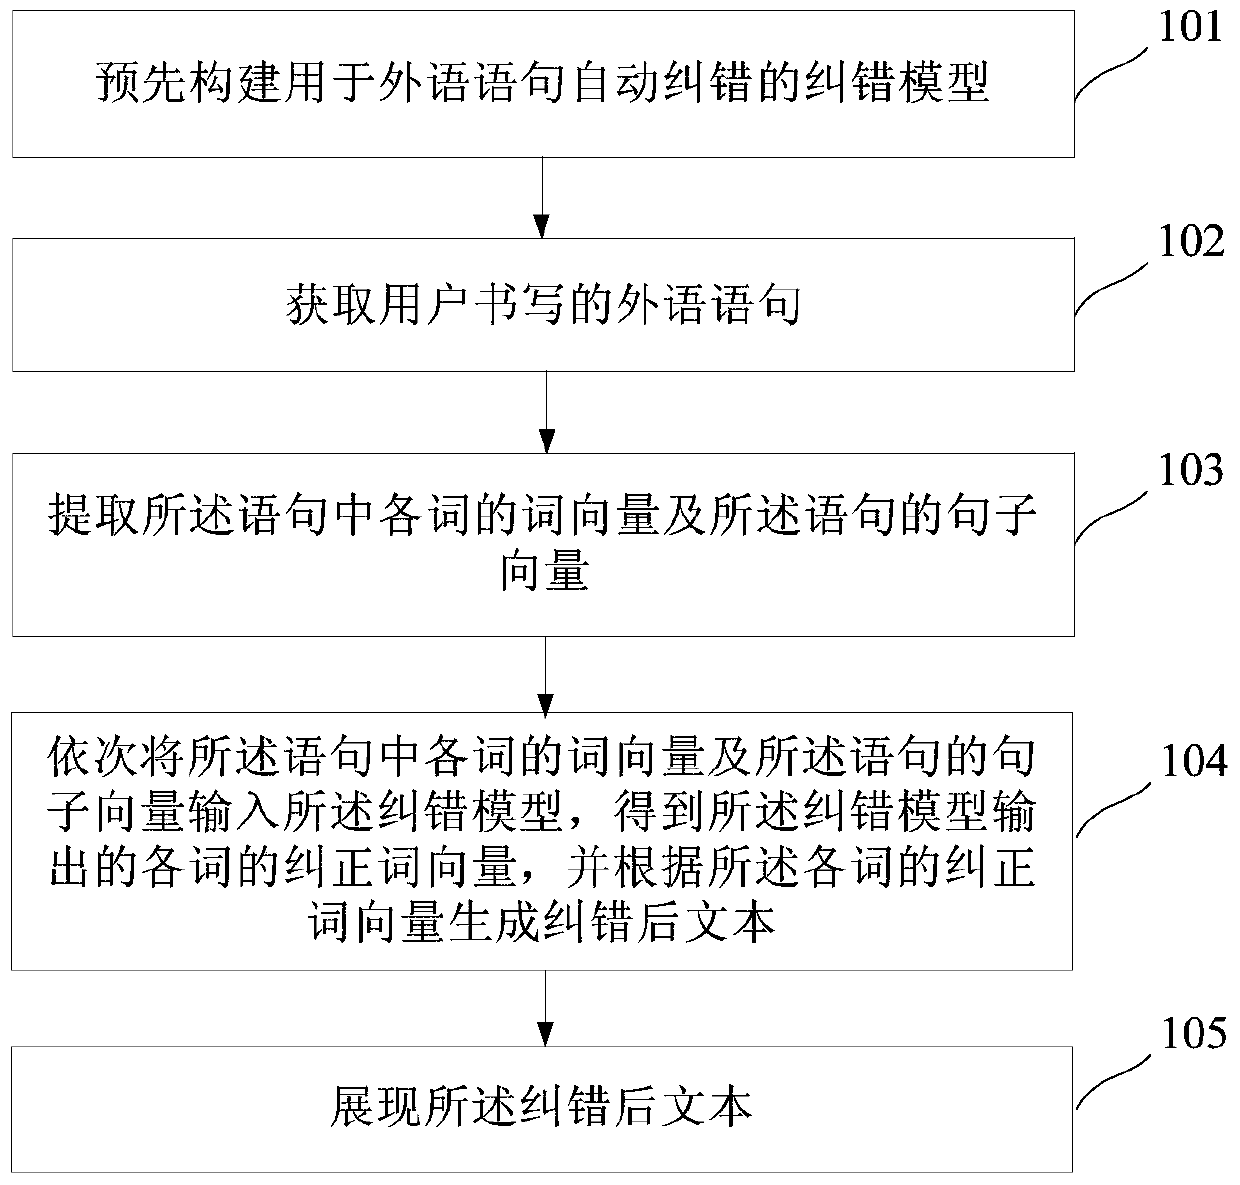 Method and system for automatic error correction in foreign language writing